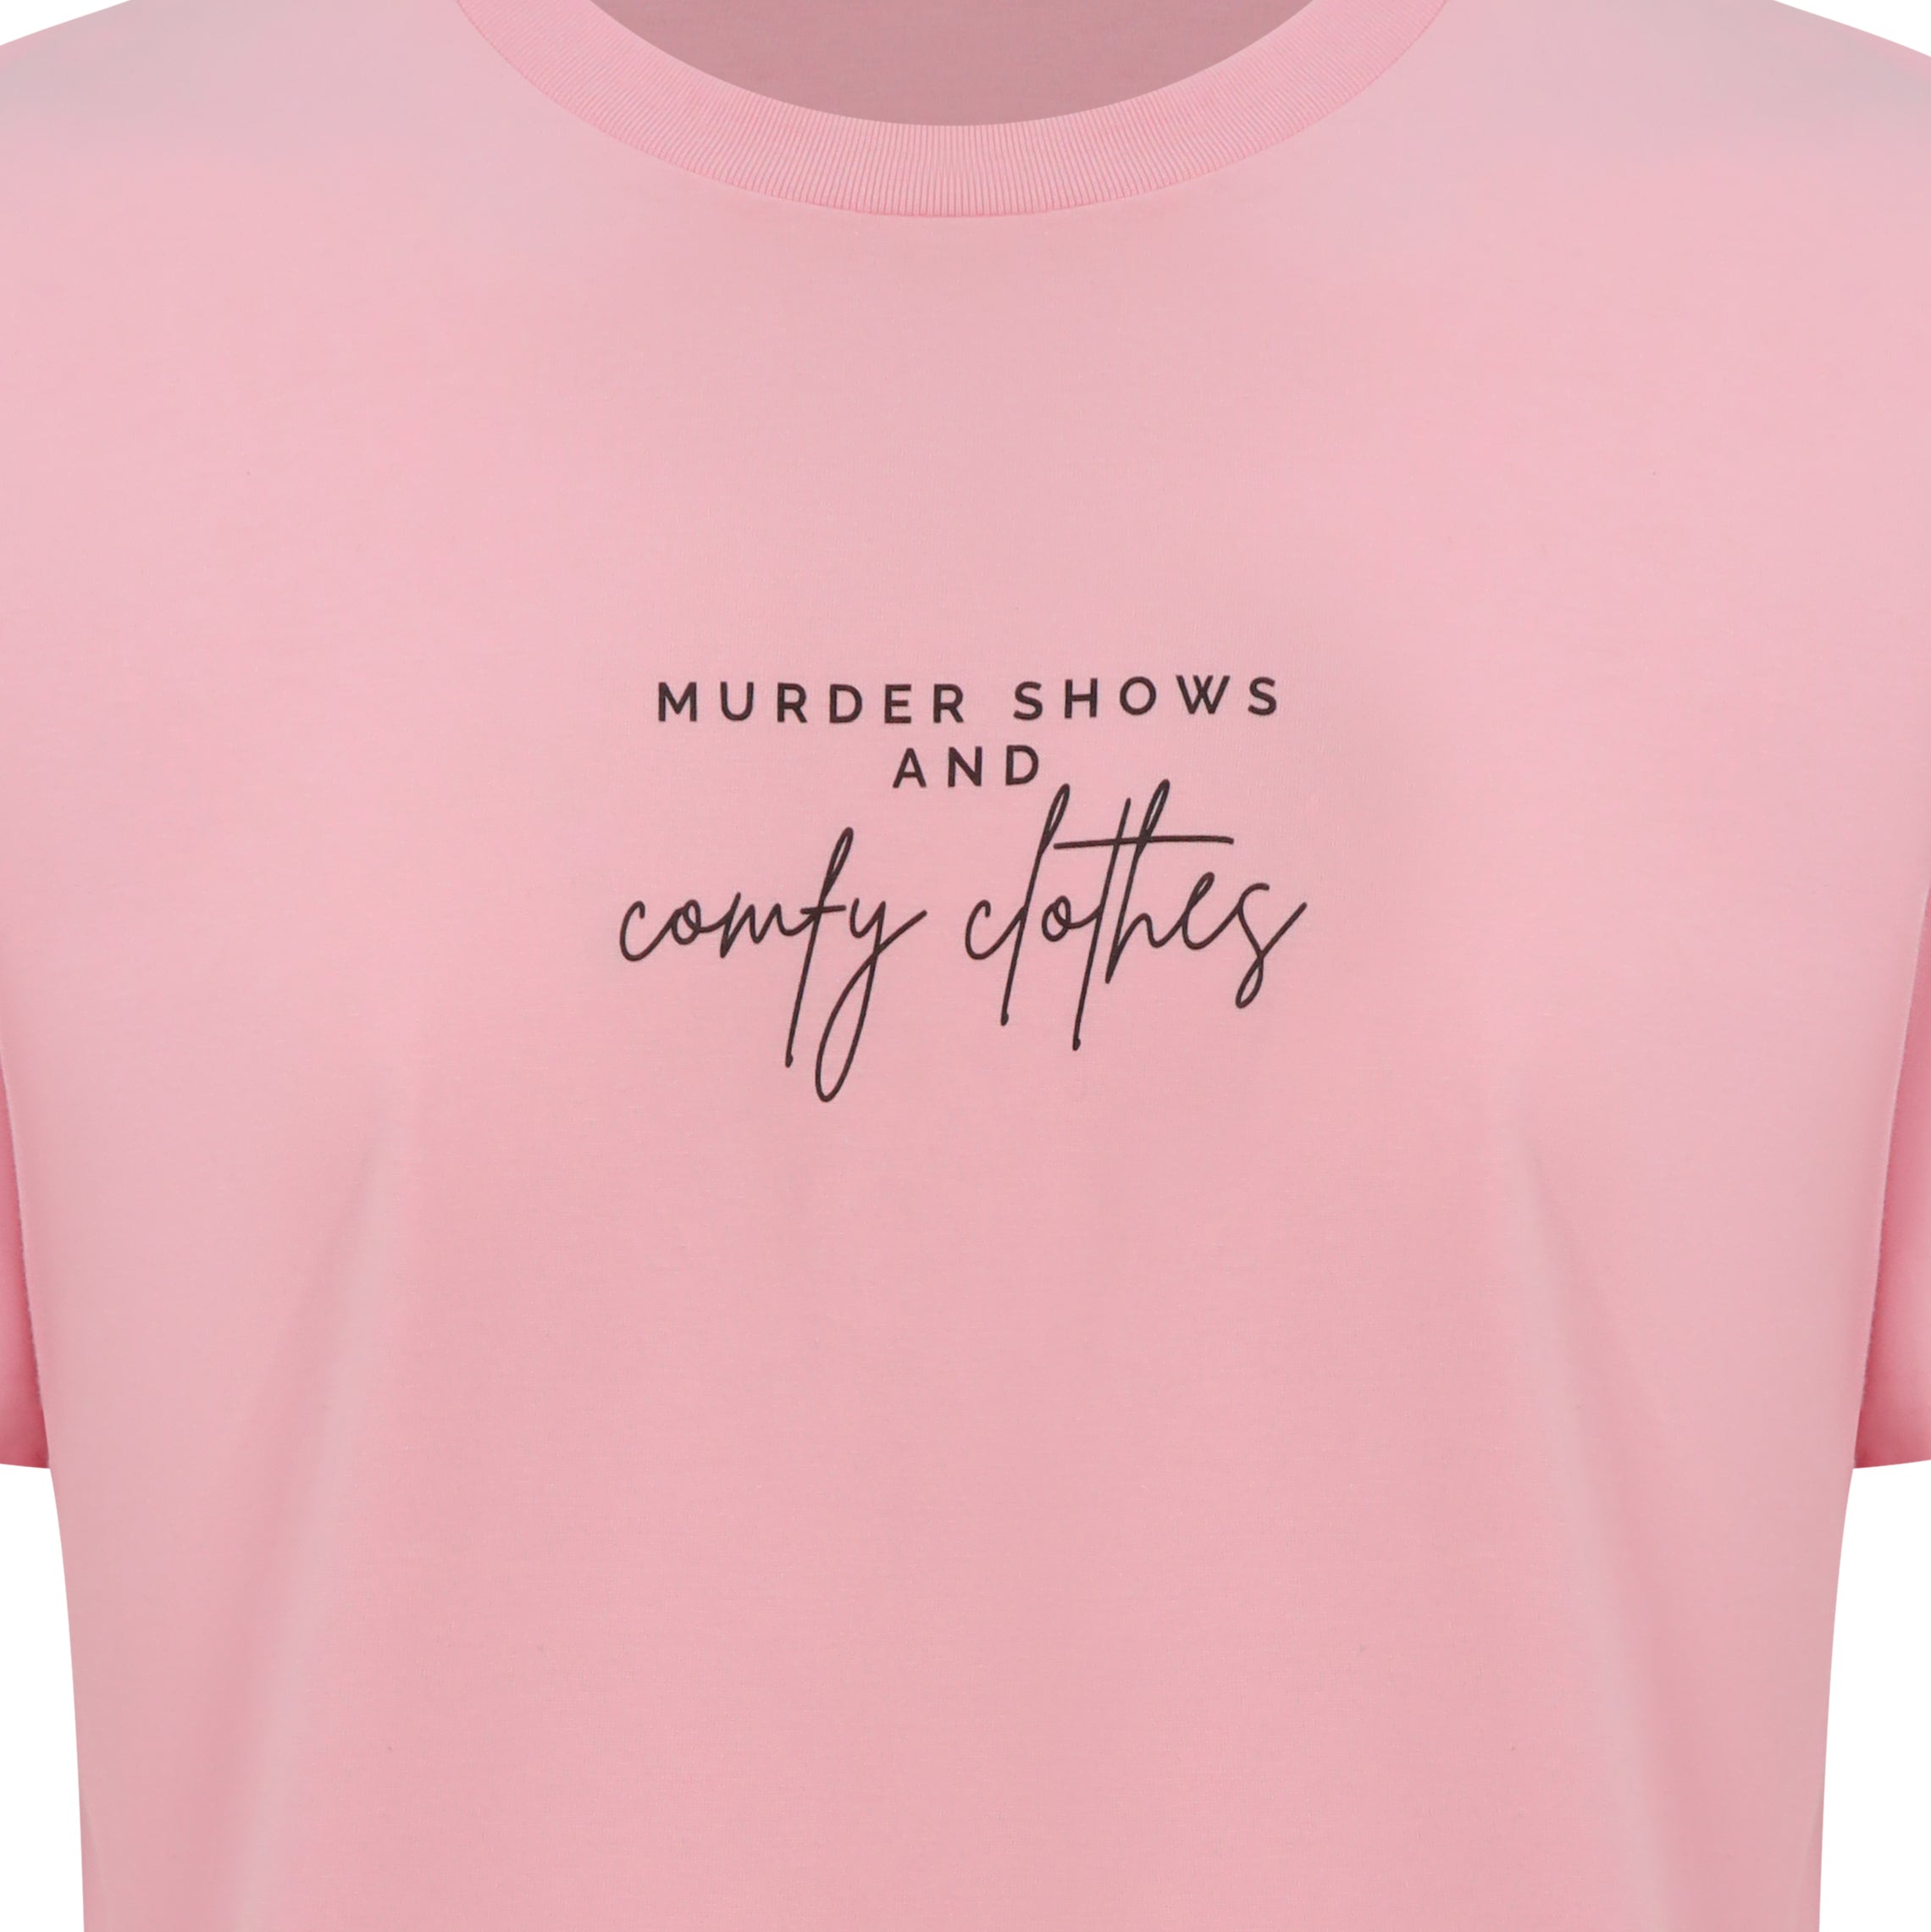 Organic T-Shirt that says: Murder shows and comfy clothes. Murder shows is in all caps in a serif font, and comfy clothes is in a handwriting style font